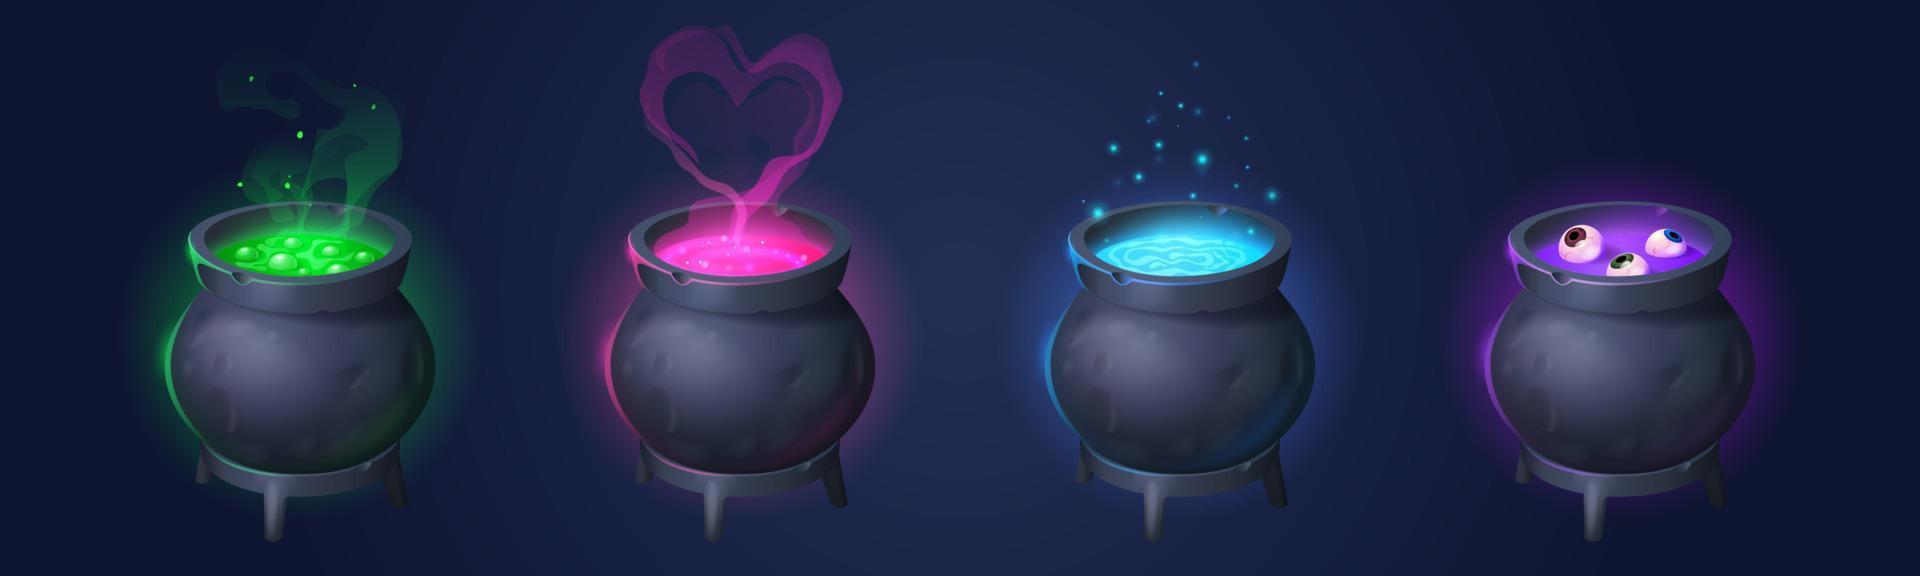 Cauldrons with witch magic potions vector